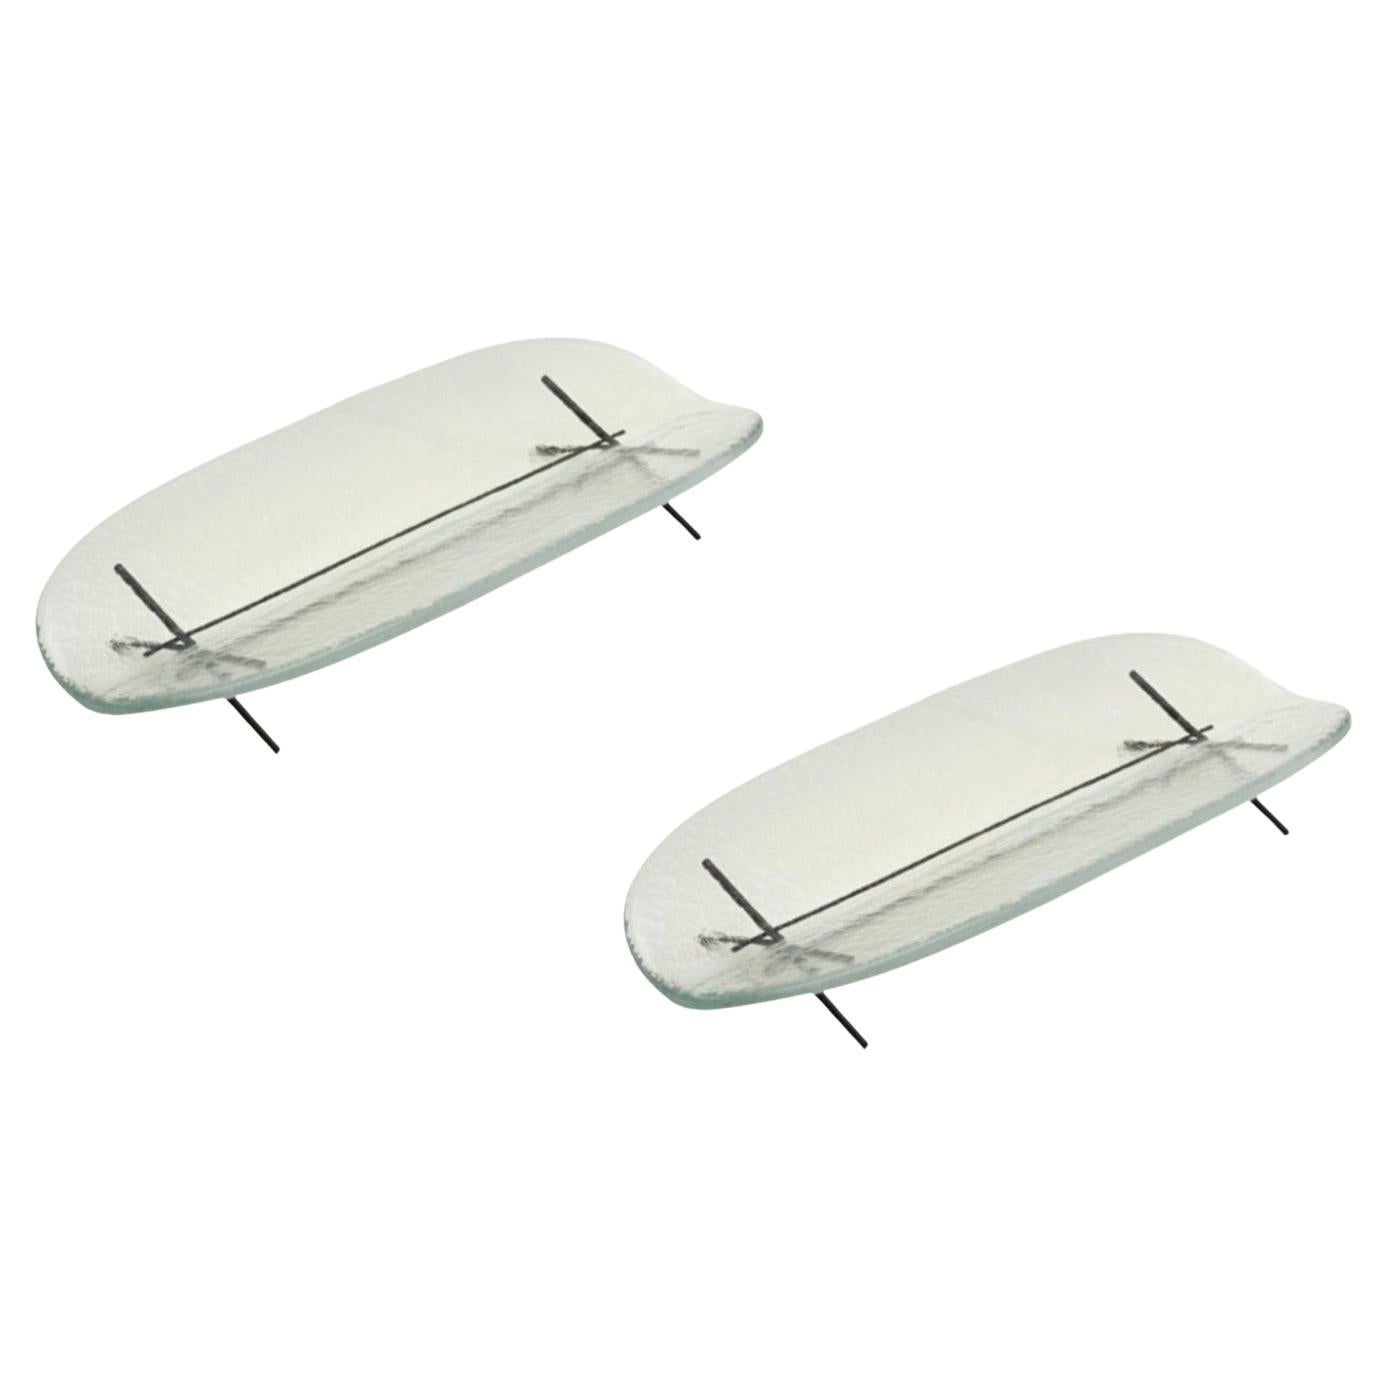 Set of 2 Hakou C Trays by Mason Editions For Sale